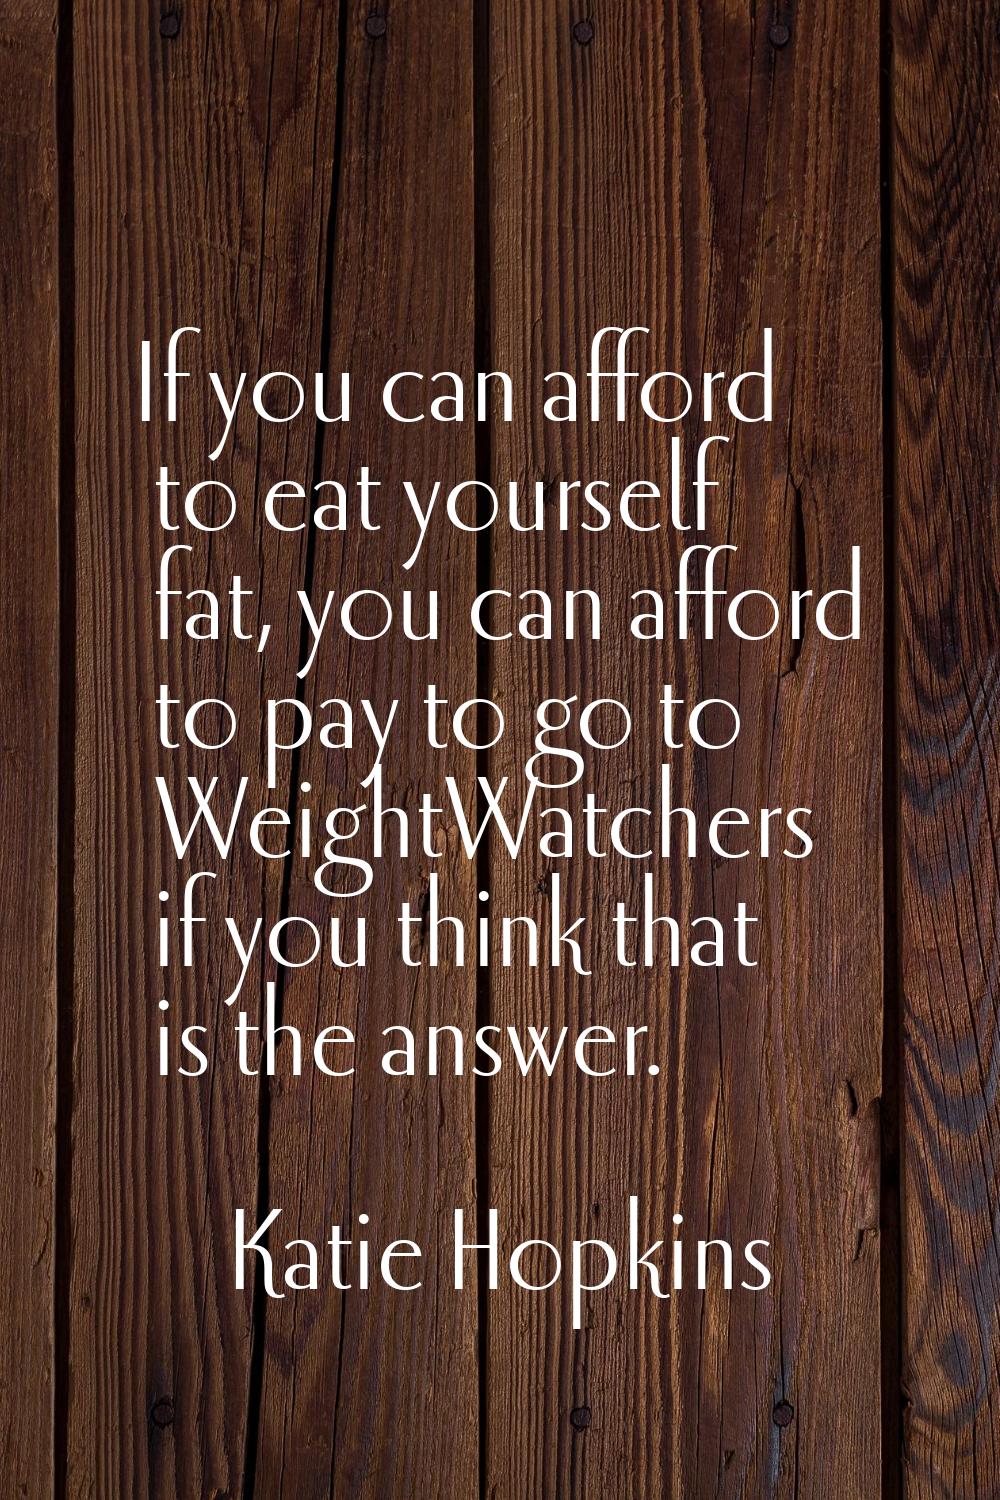 If you can afford to eat yourself fat, you can afford to pay to go to WeightWatchers if you think t